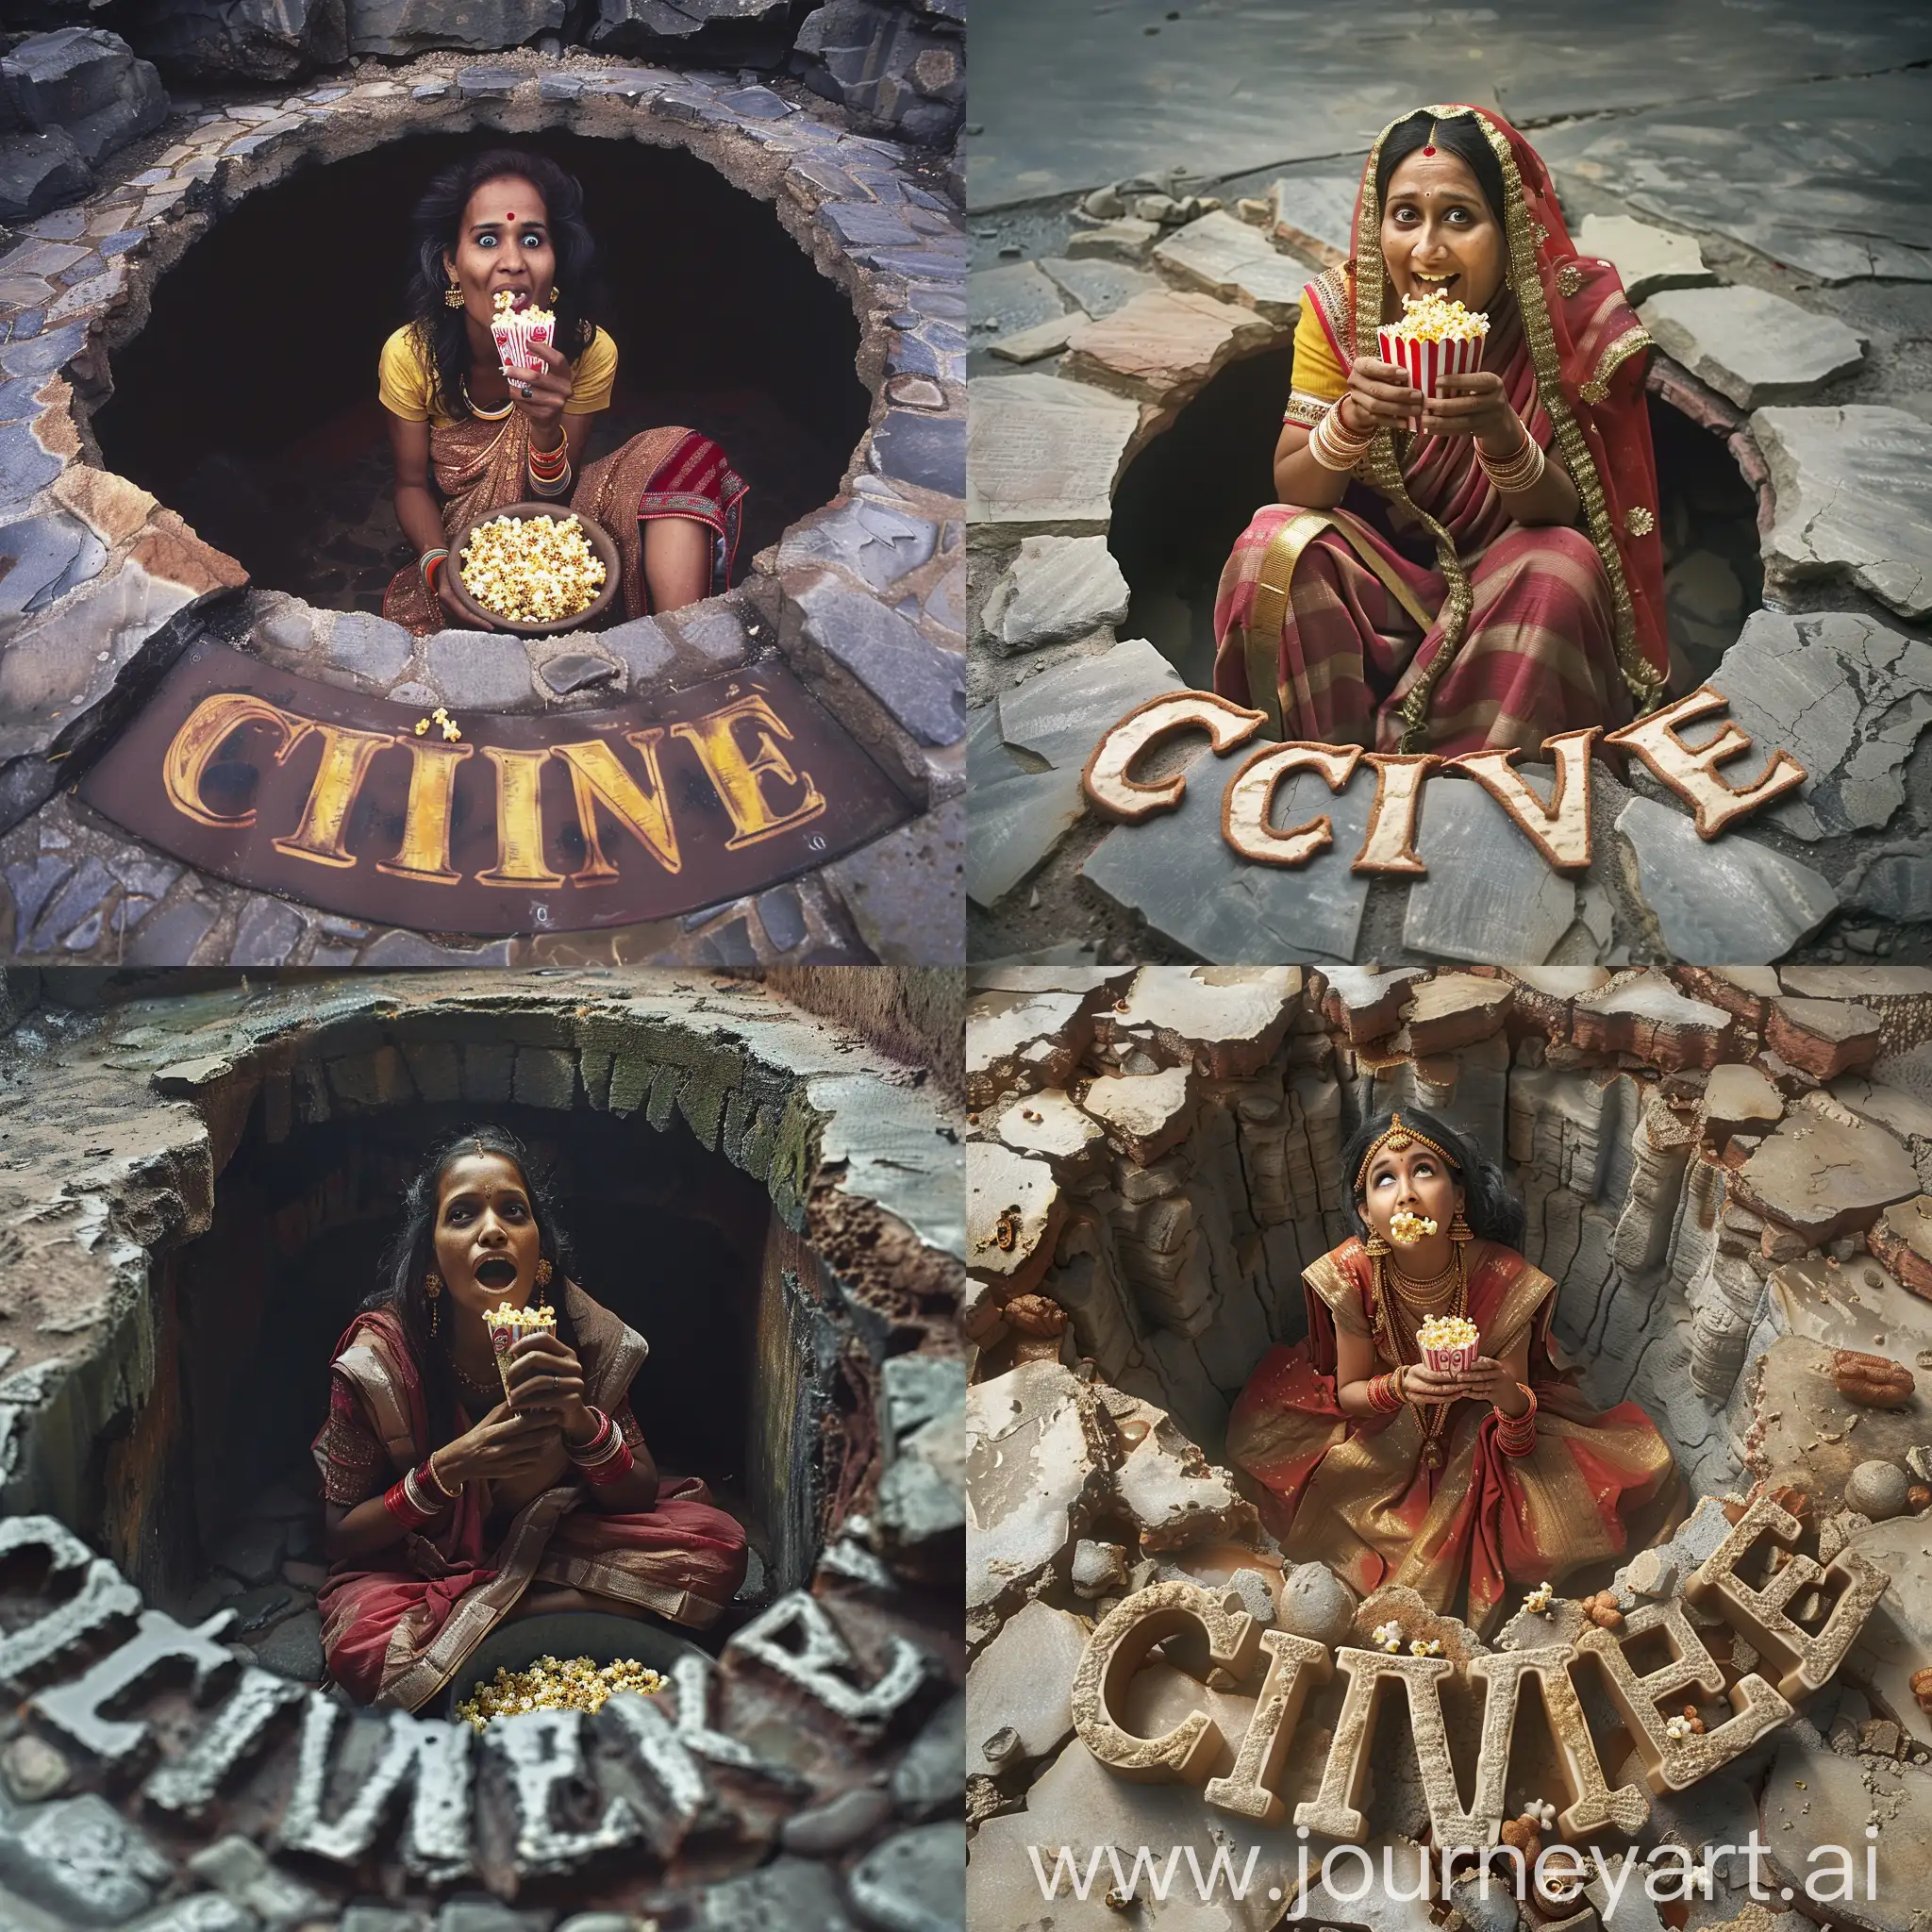 an Indian woman eating popcorn, sitting in the name `CineKmetá` that emerges from the floor made of stone